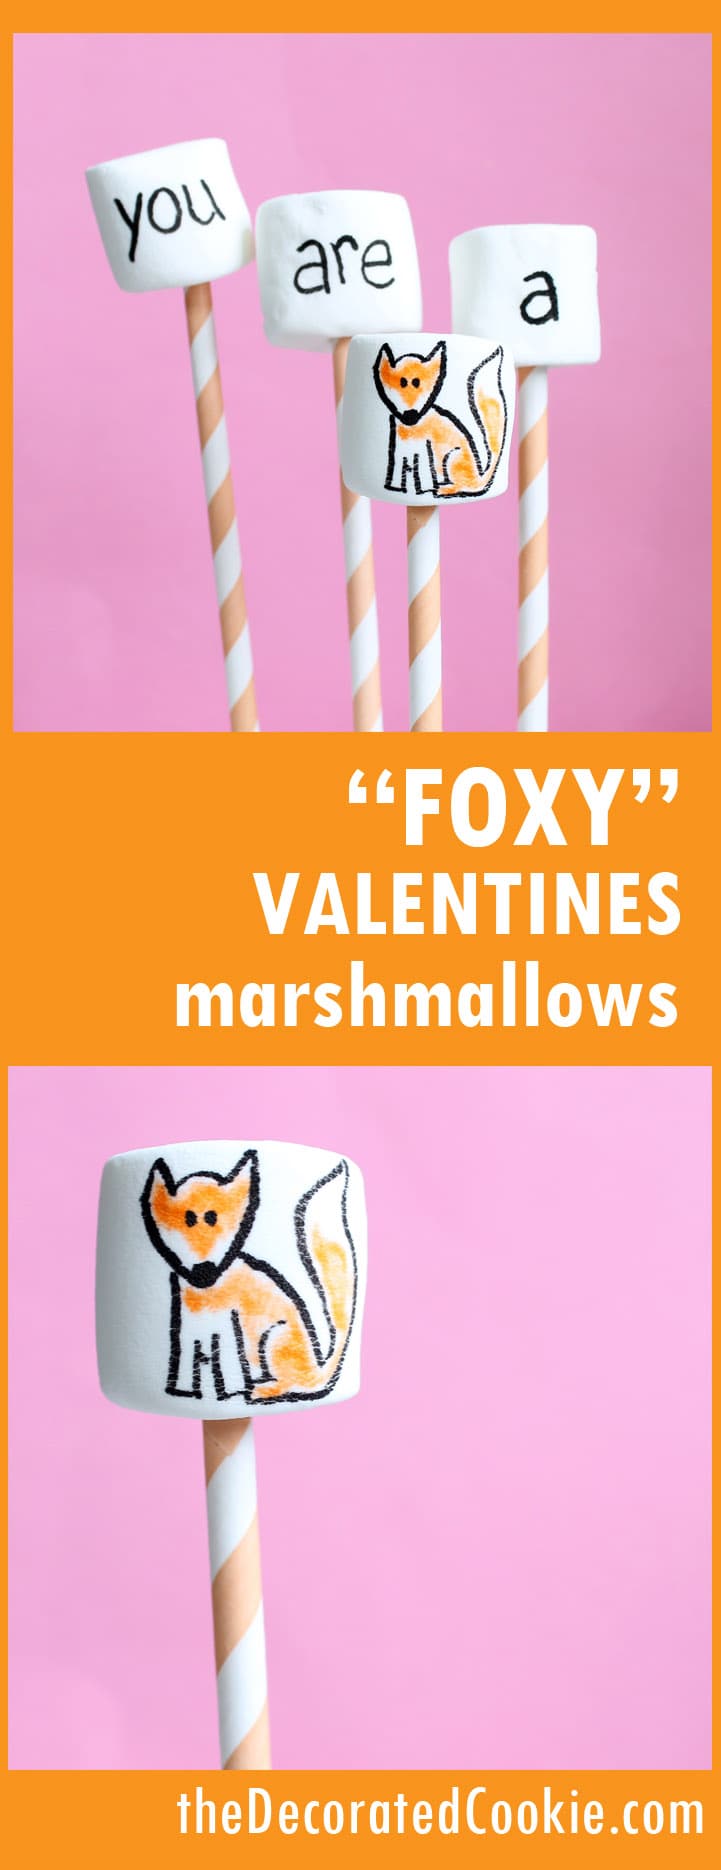 "You are a Fox" Valentine's Day marshmallow pops 